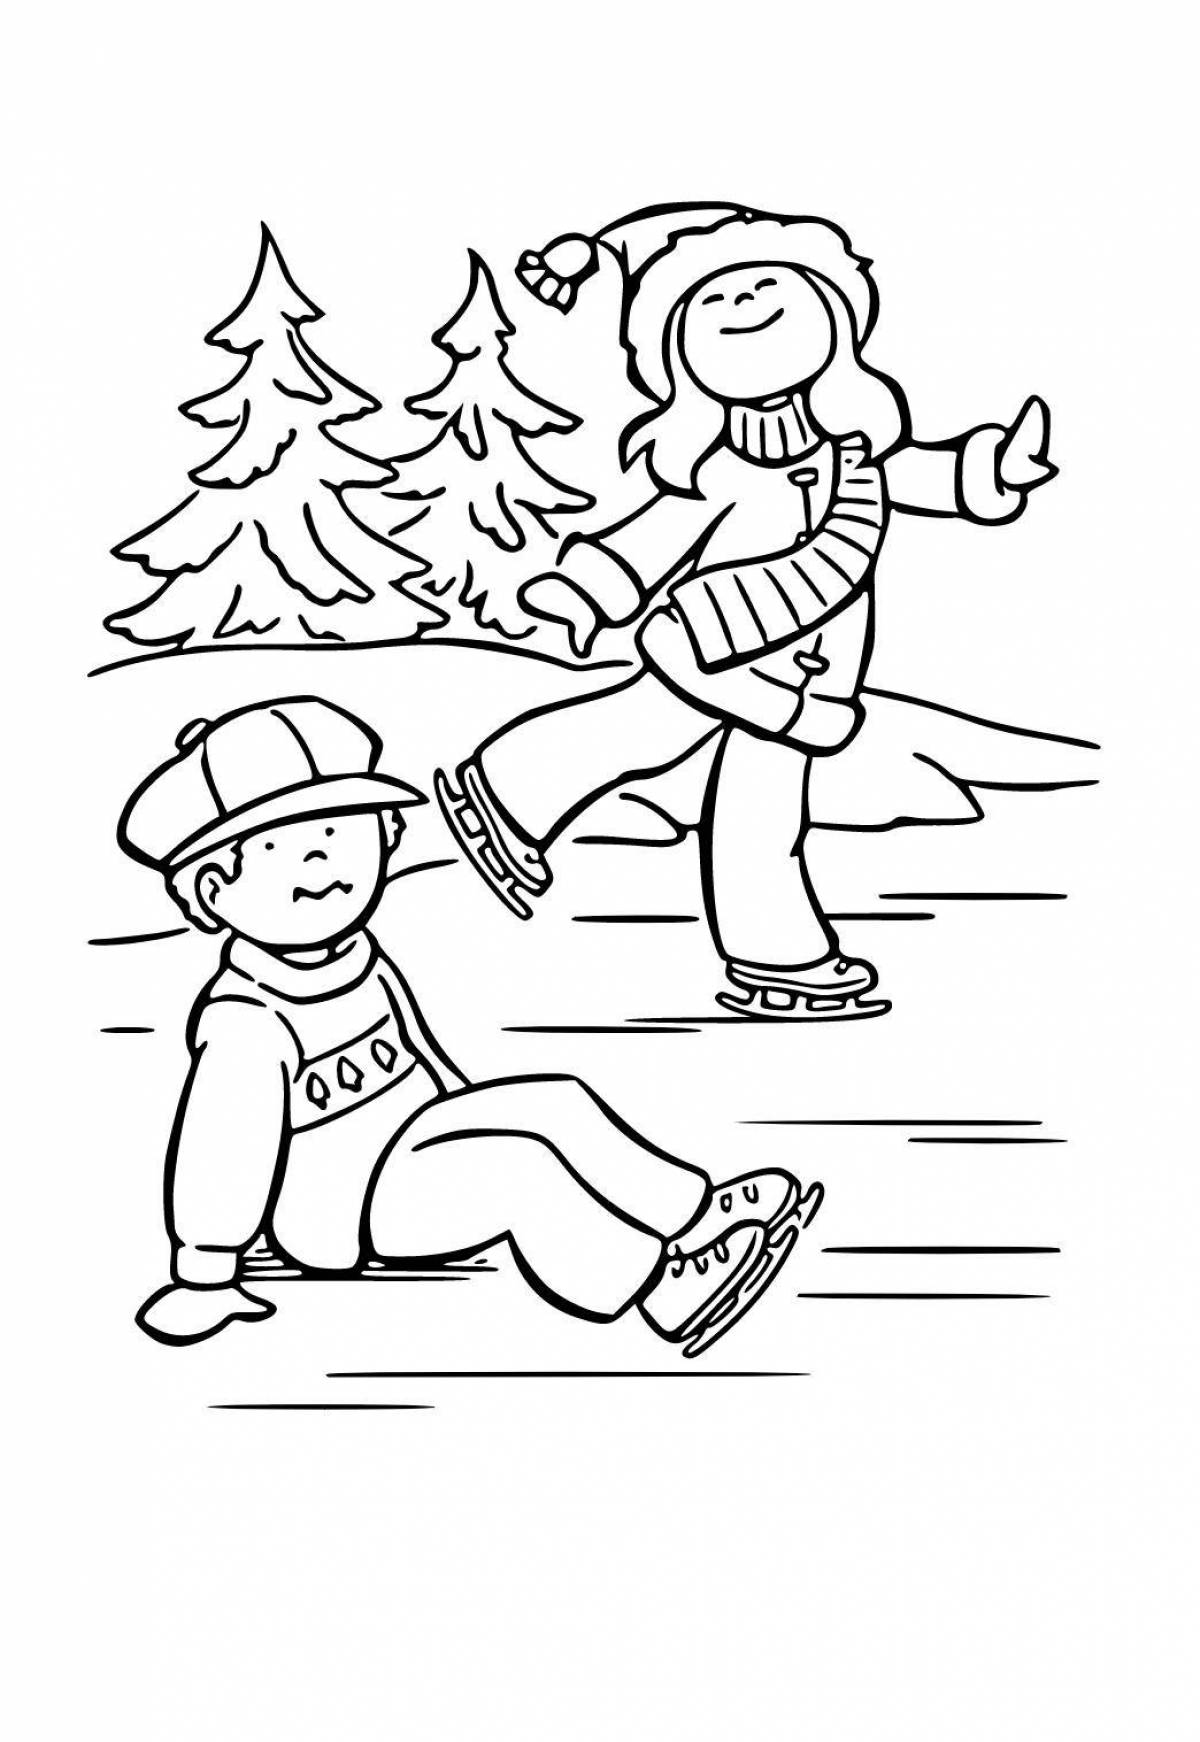 Colorful safe ice coloring page